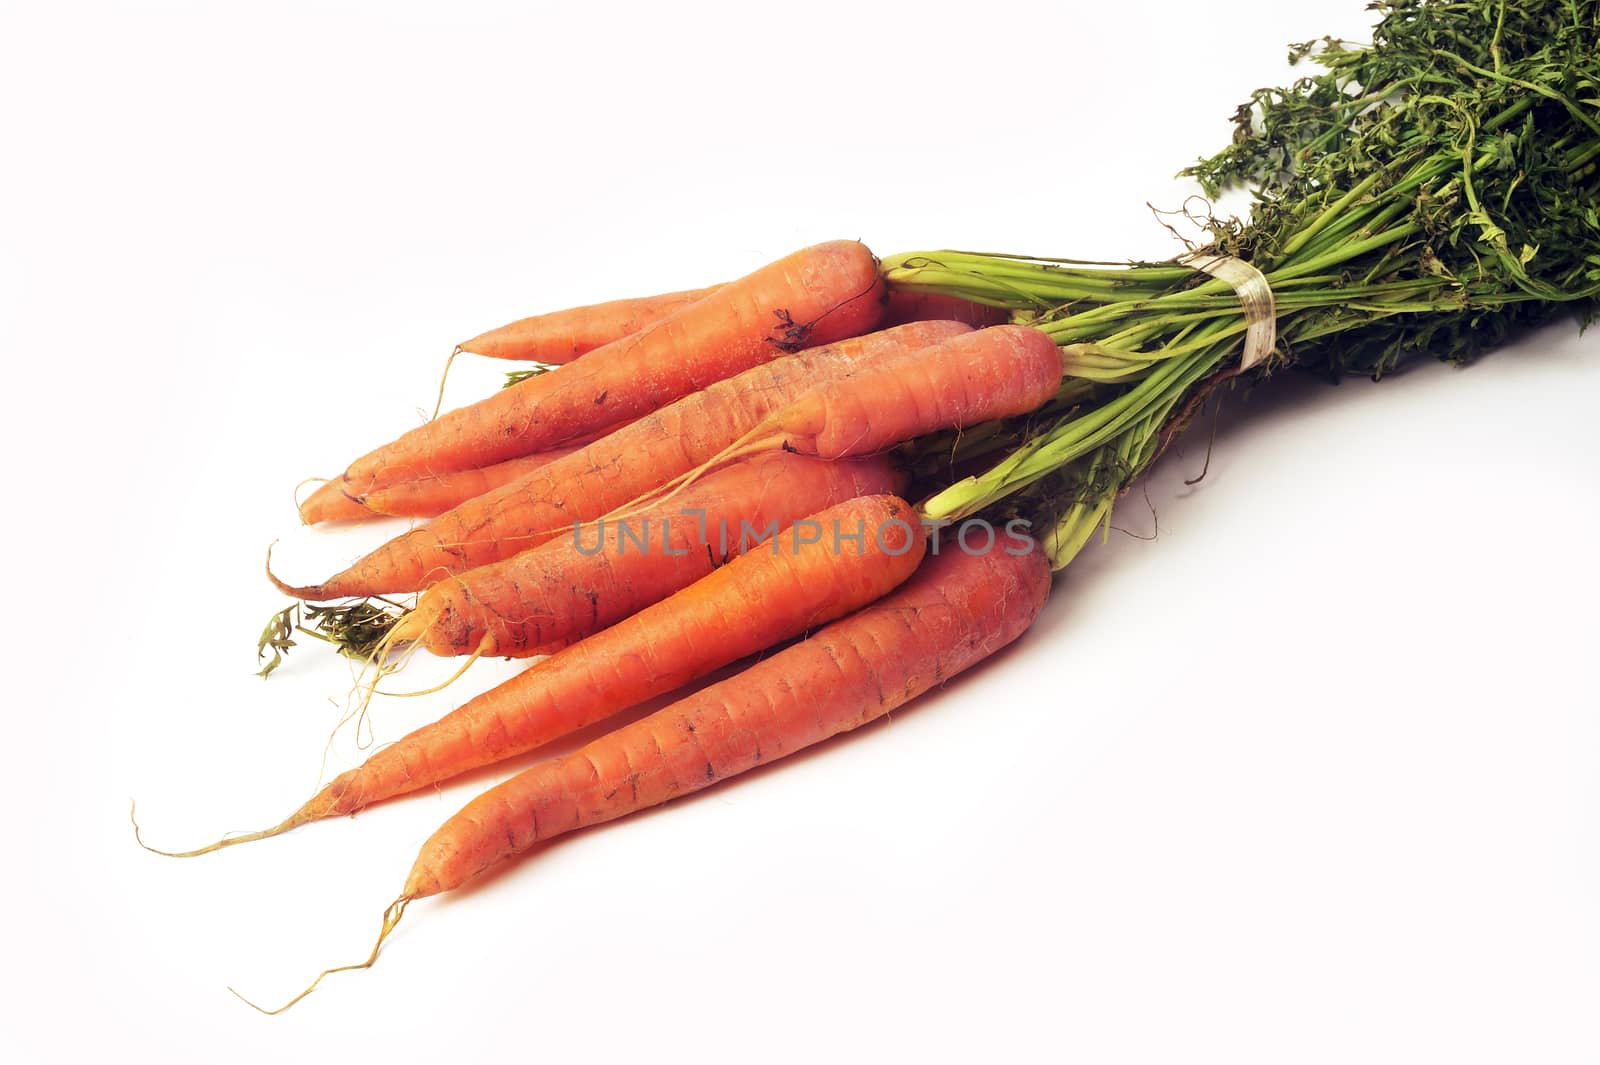 isolated on white background in studio carrots